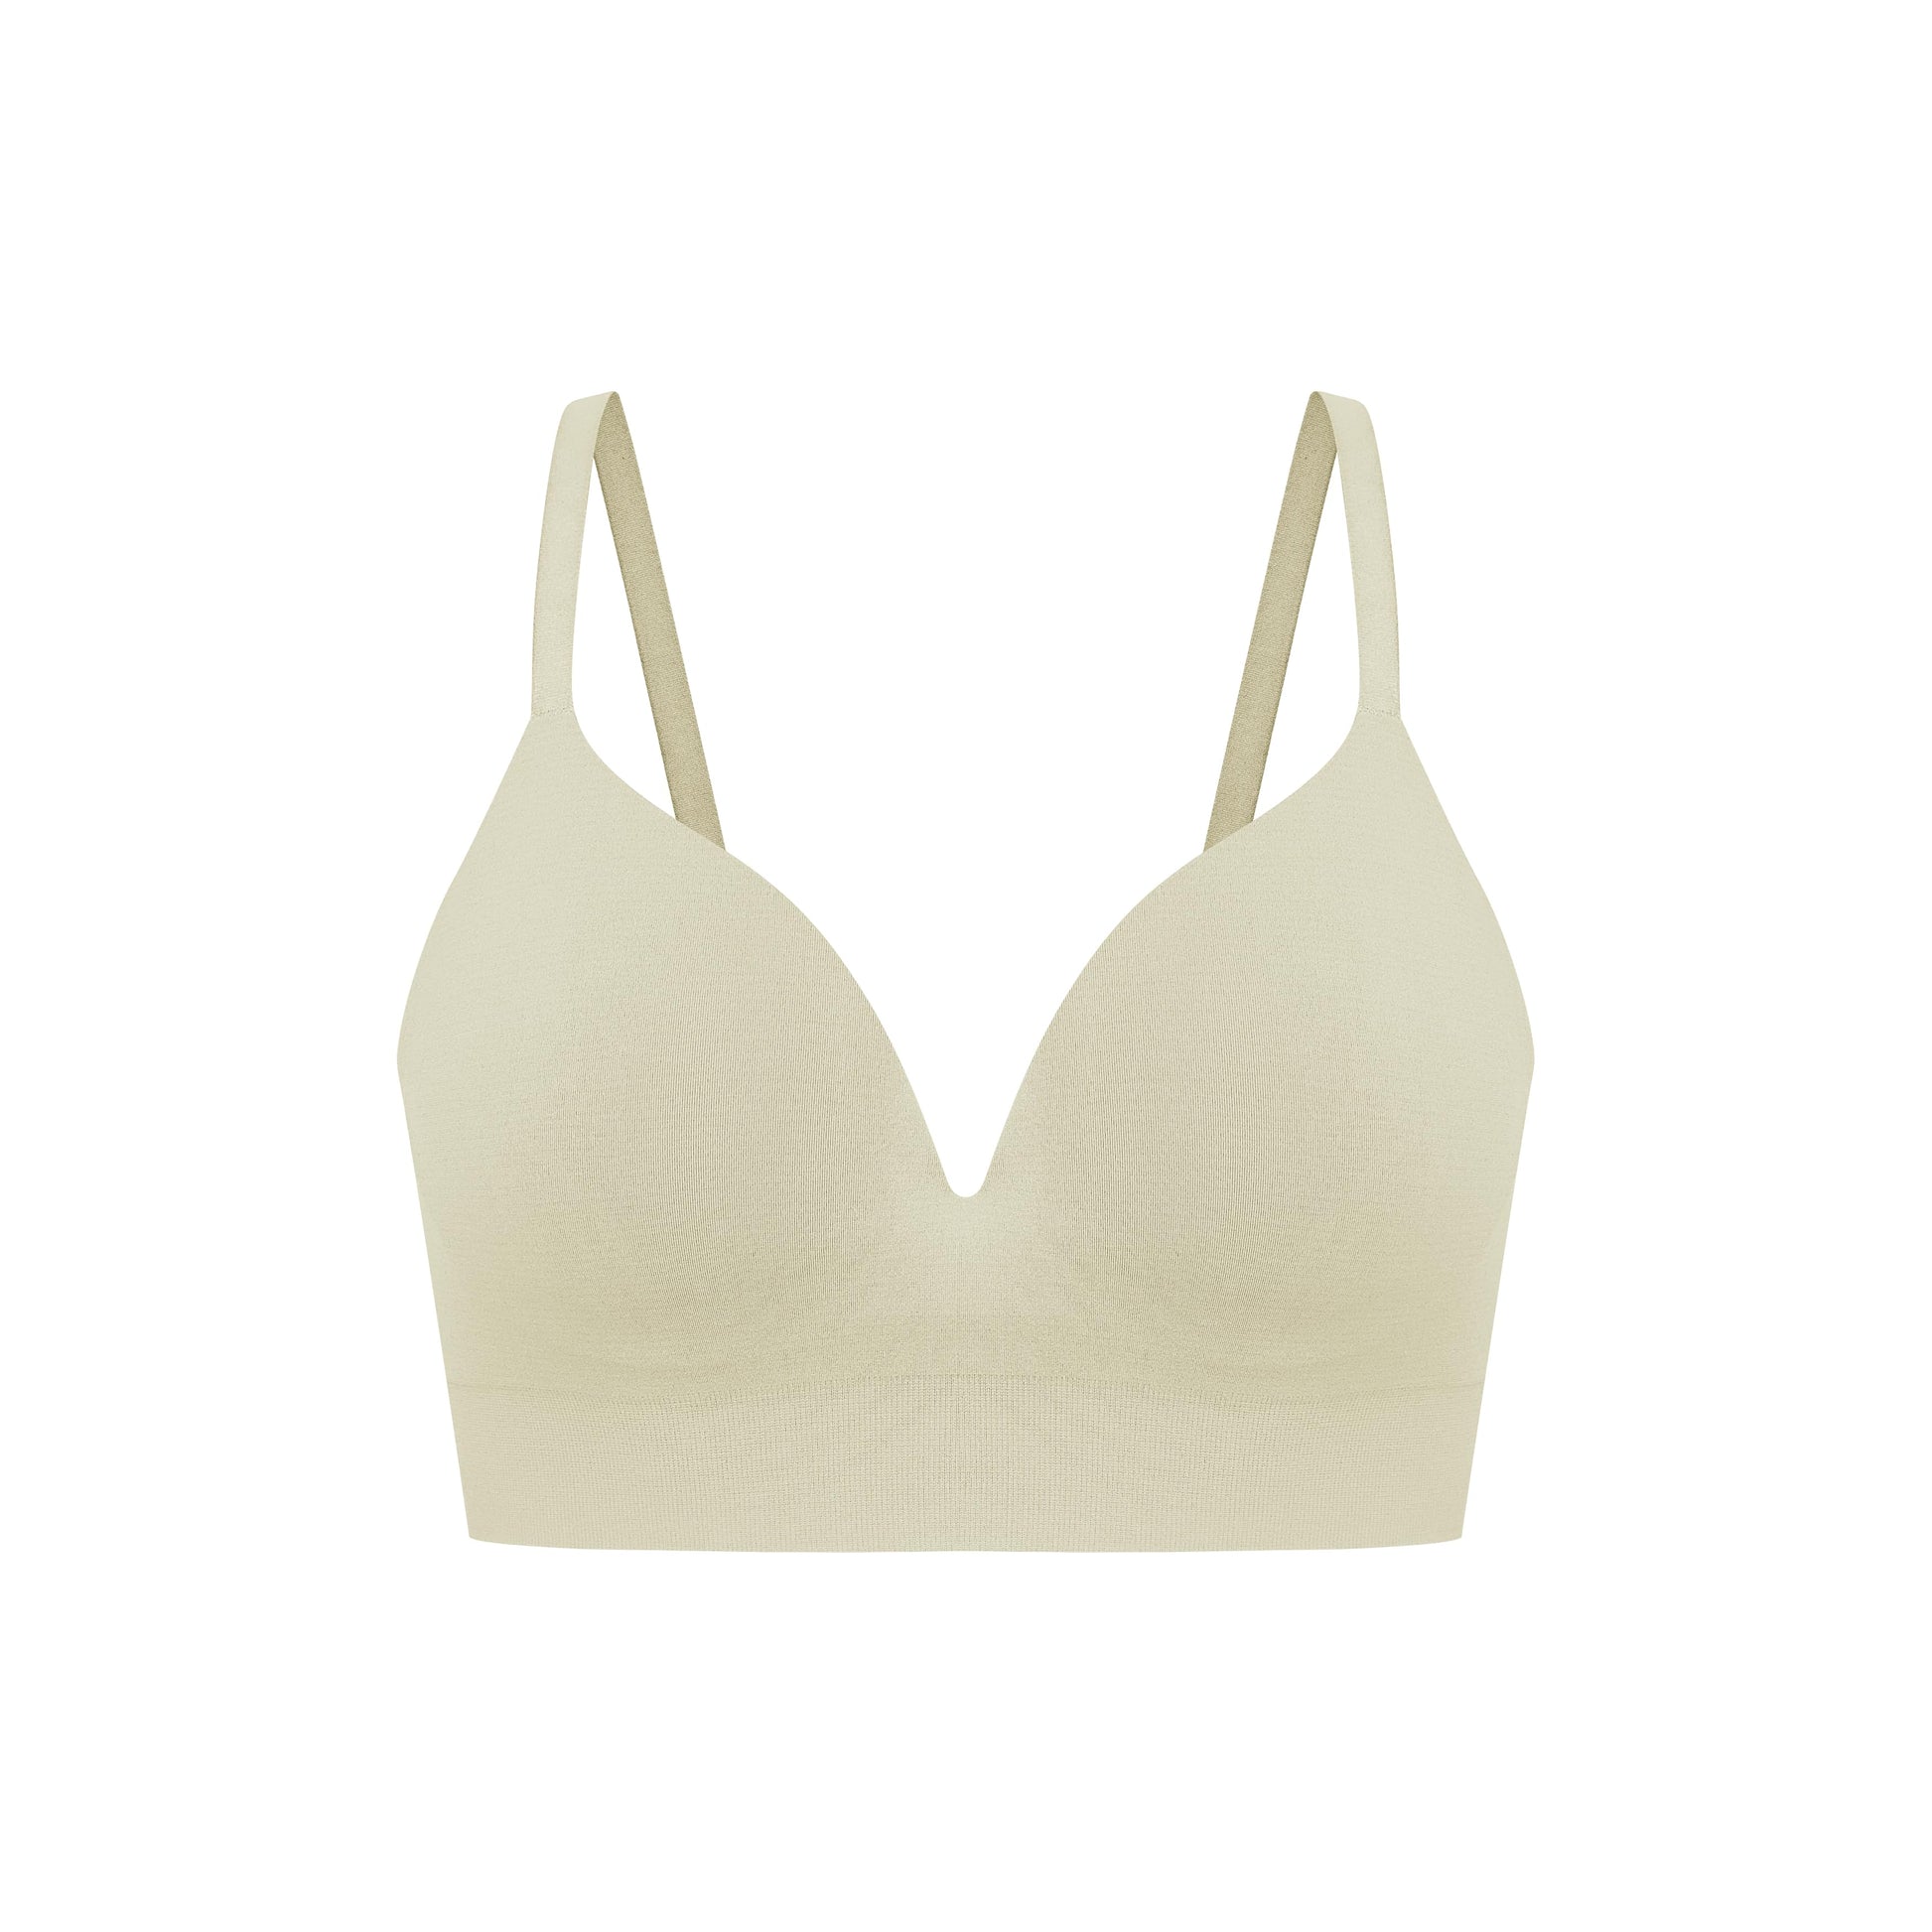 Super Soft Moulded Cup Seamless Bra's - Bodycare Creations